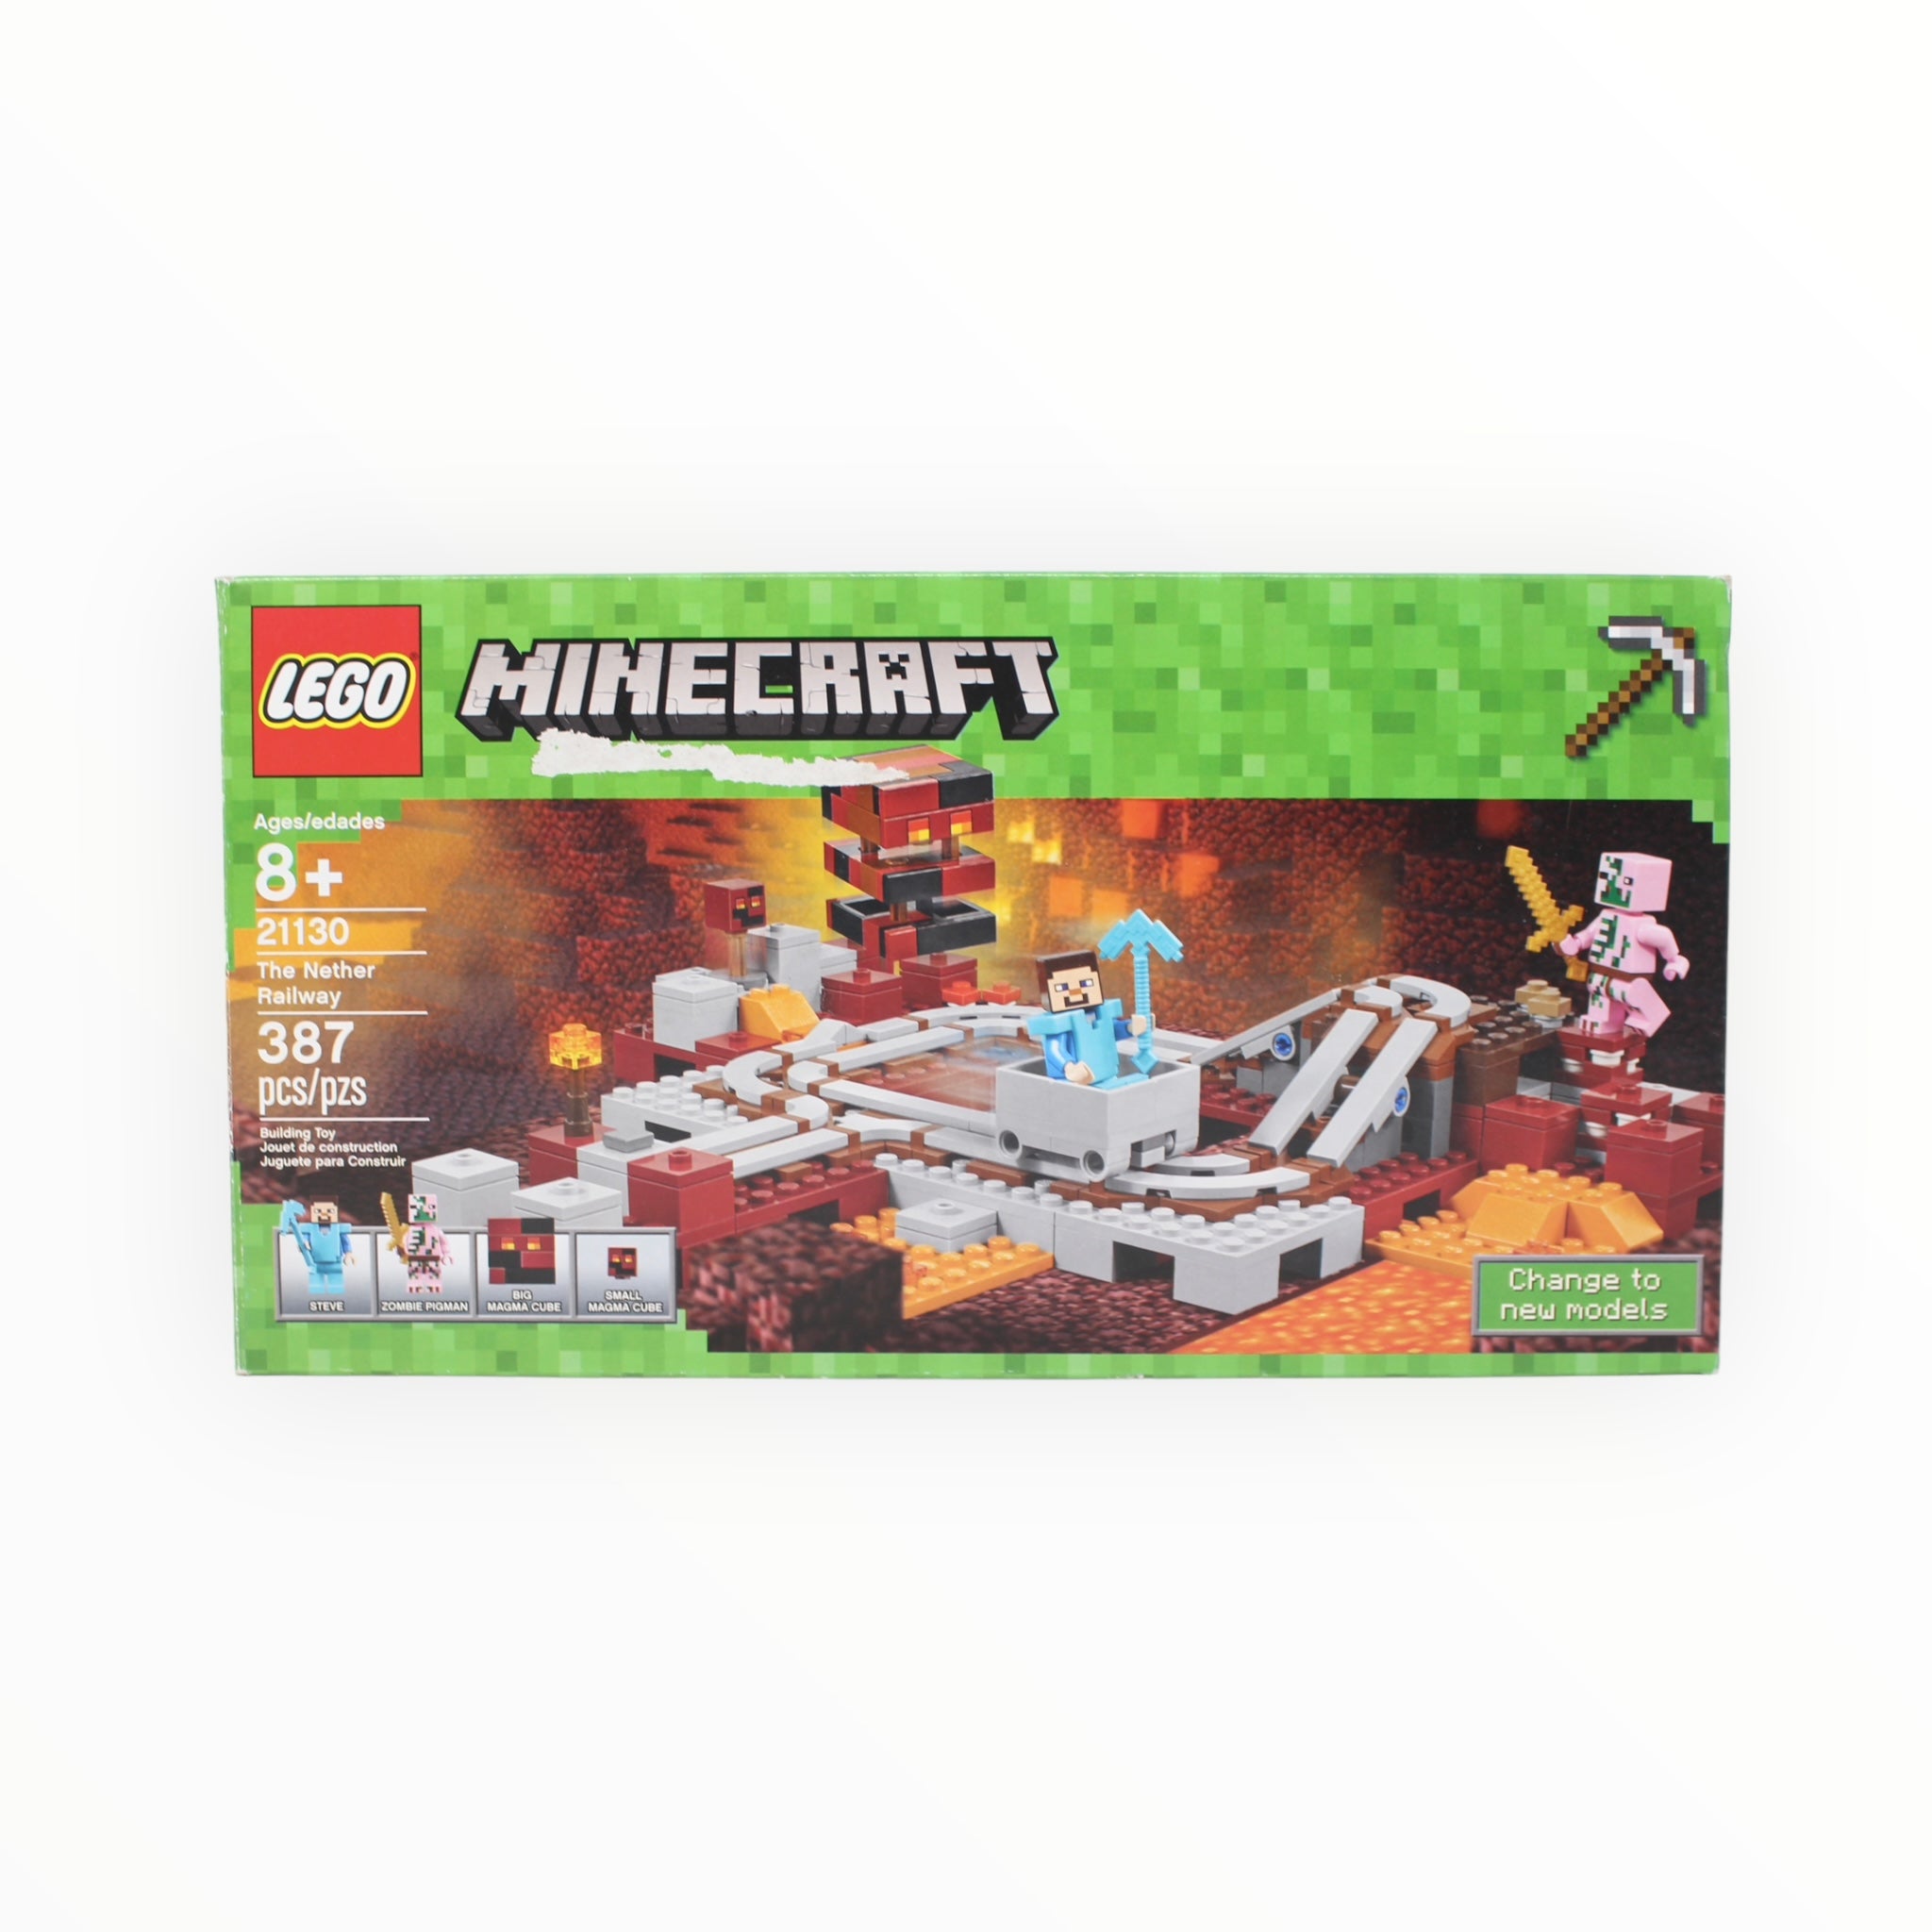 Certified Used Set 21130 Minecraft The Nether Railway